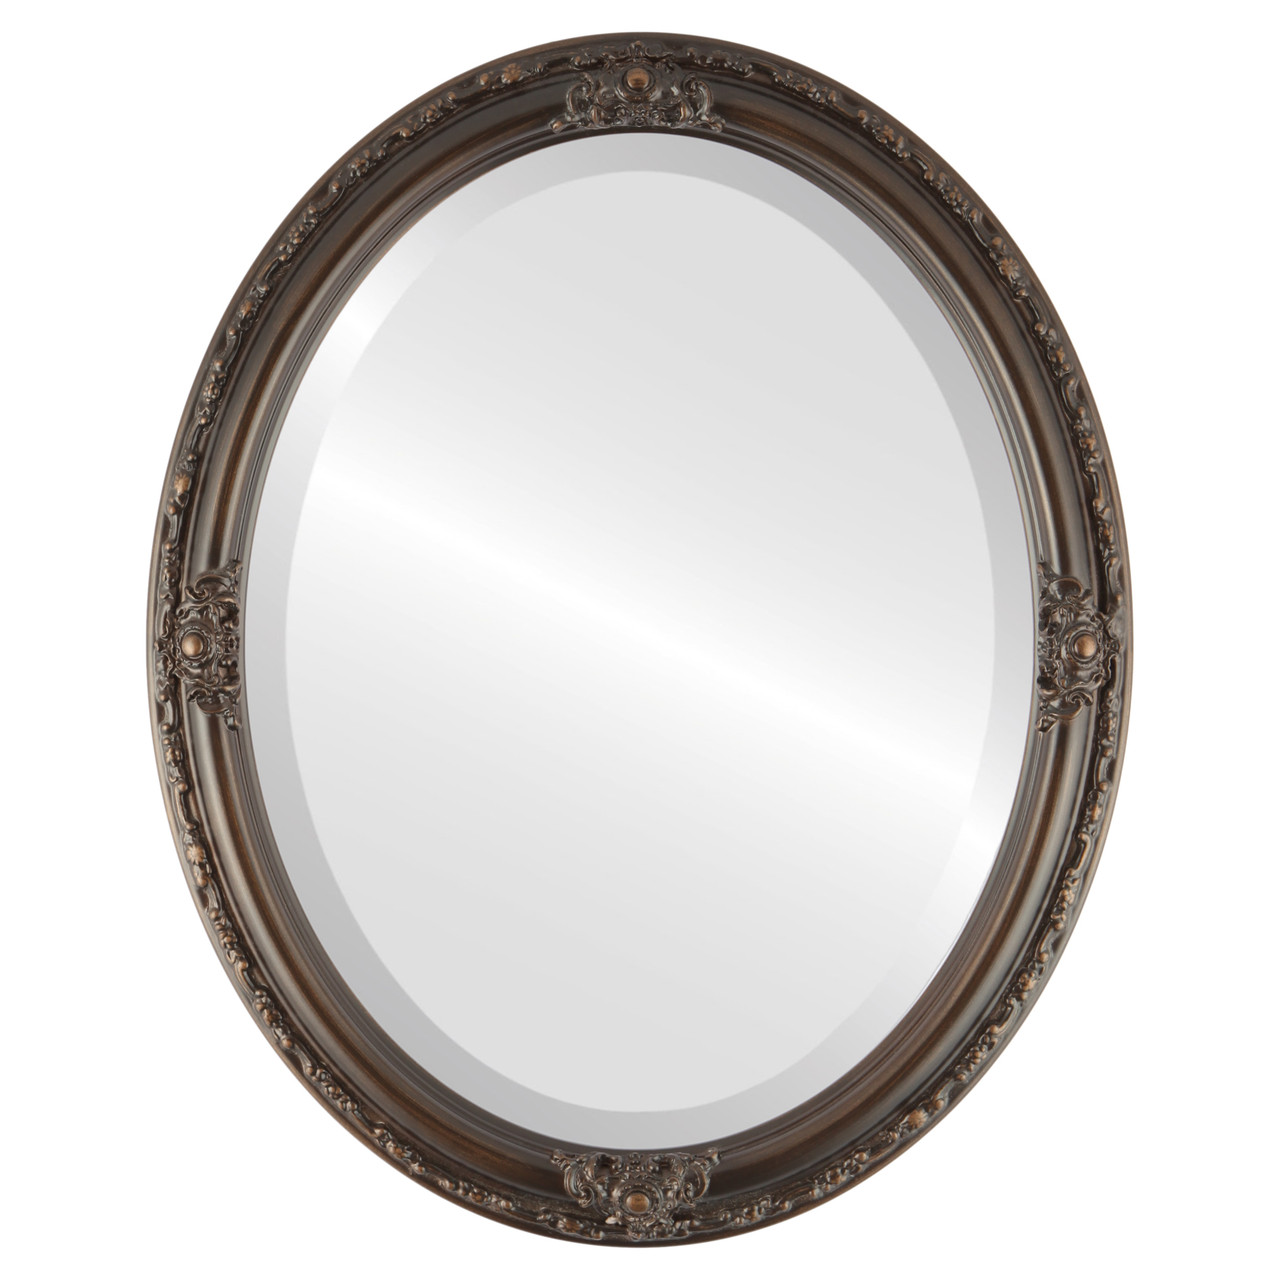 Oval Beveled Wall Mirror for Home Decor Florence Style Rubbed Bronze - 5